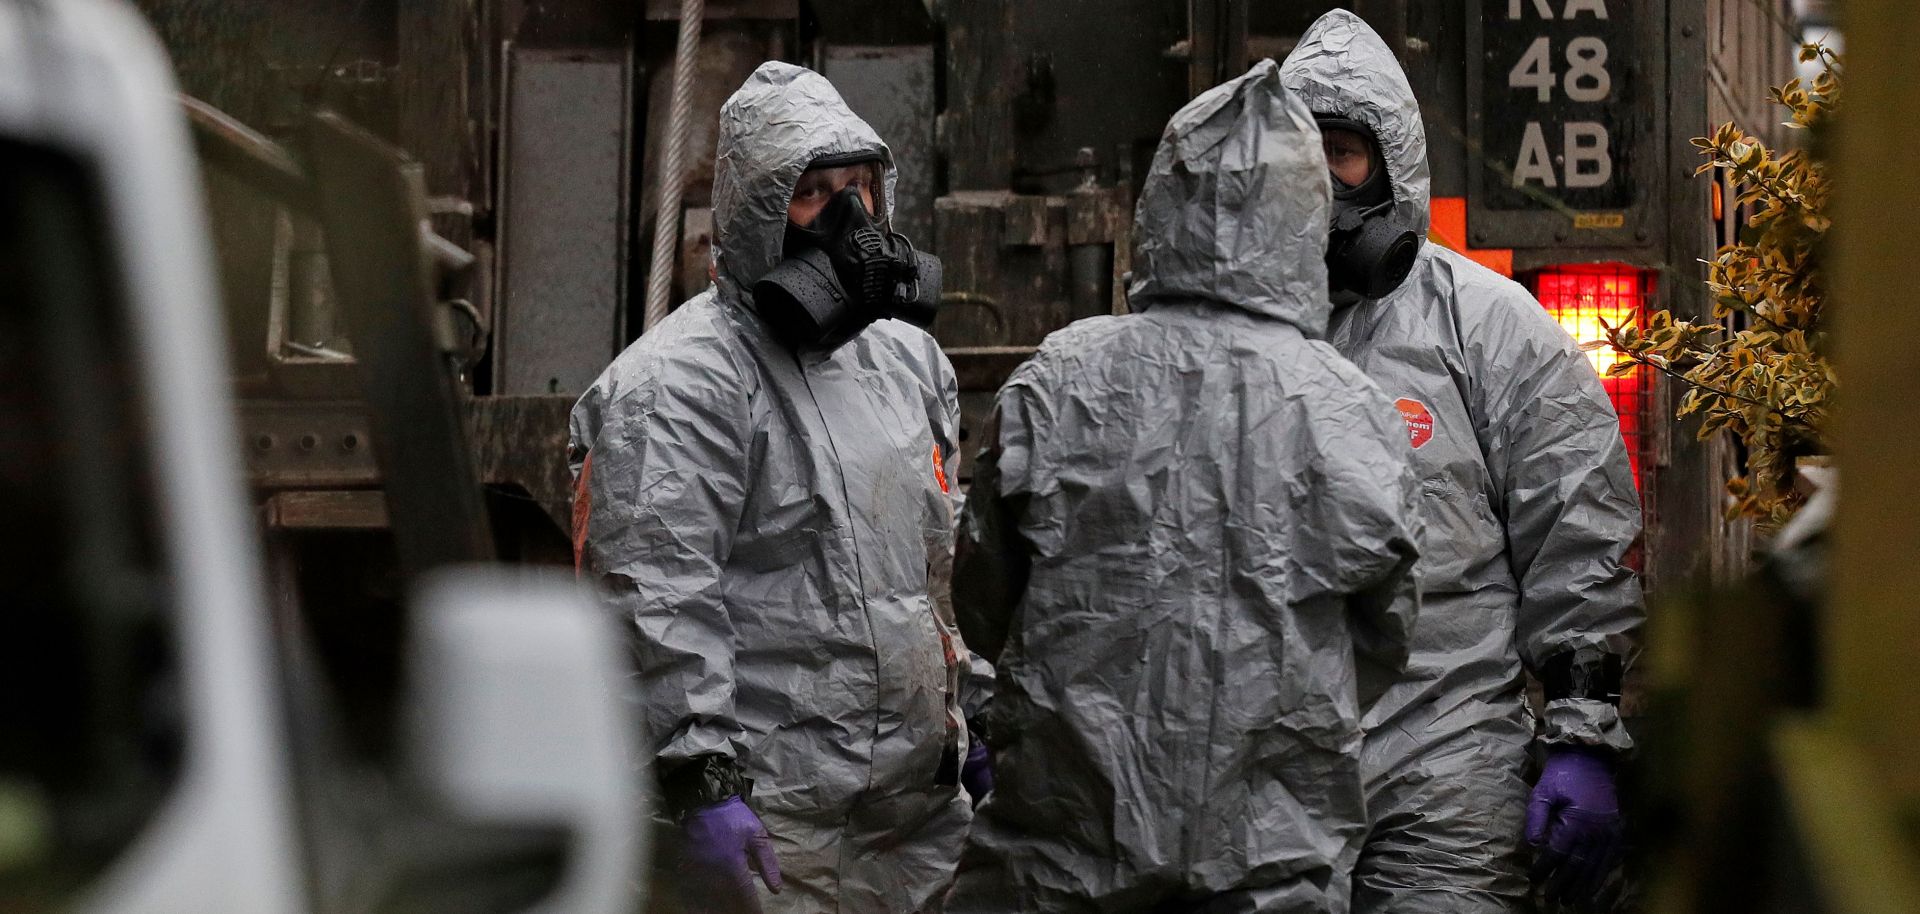 British military personnel wear protective clothing while investigating the poisoning of two people in England.